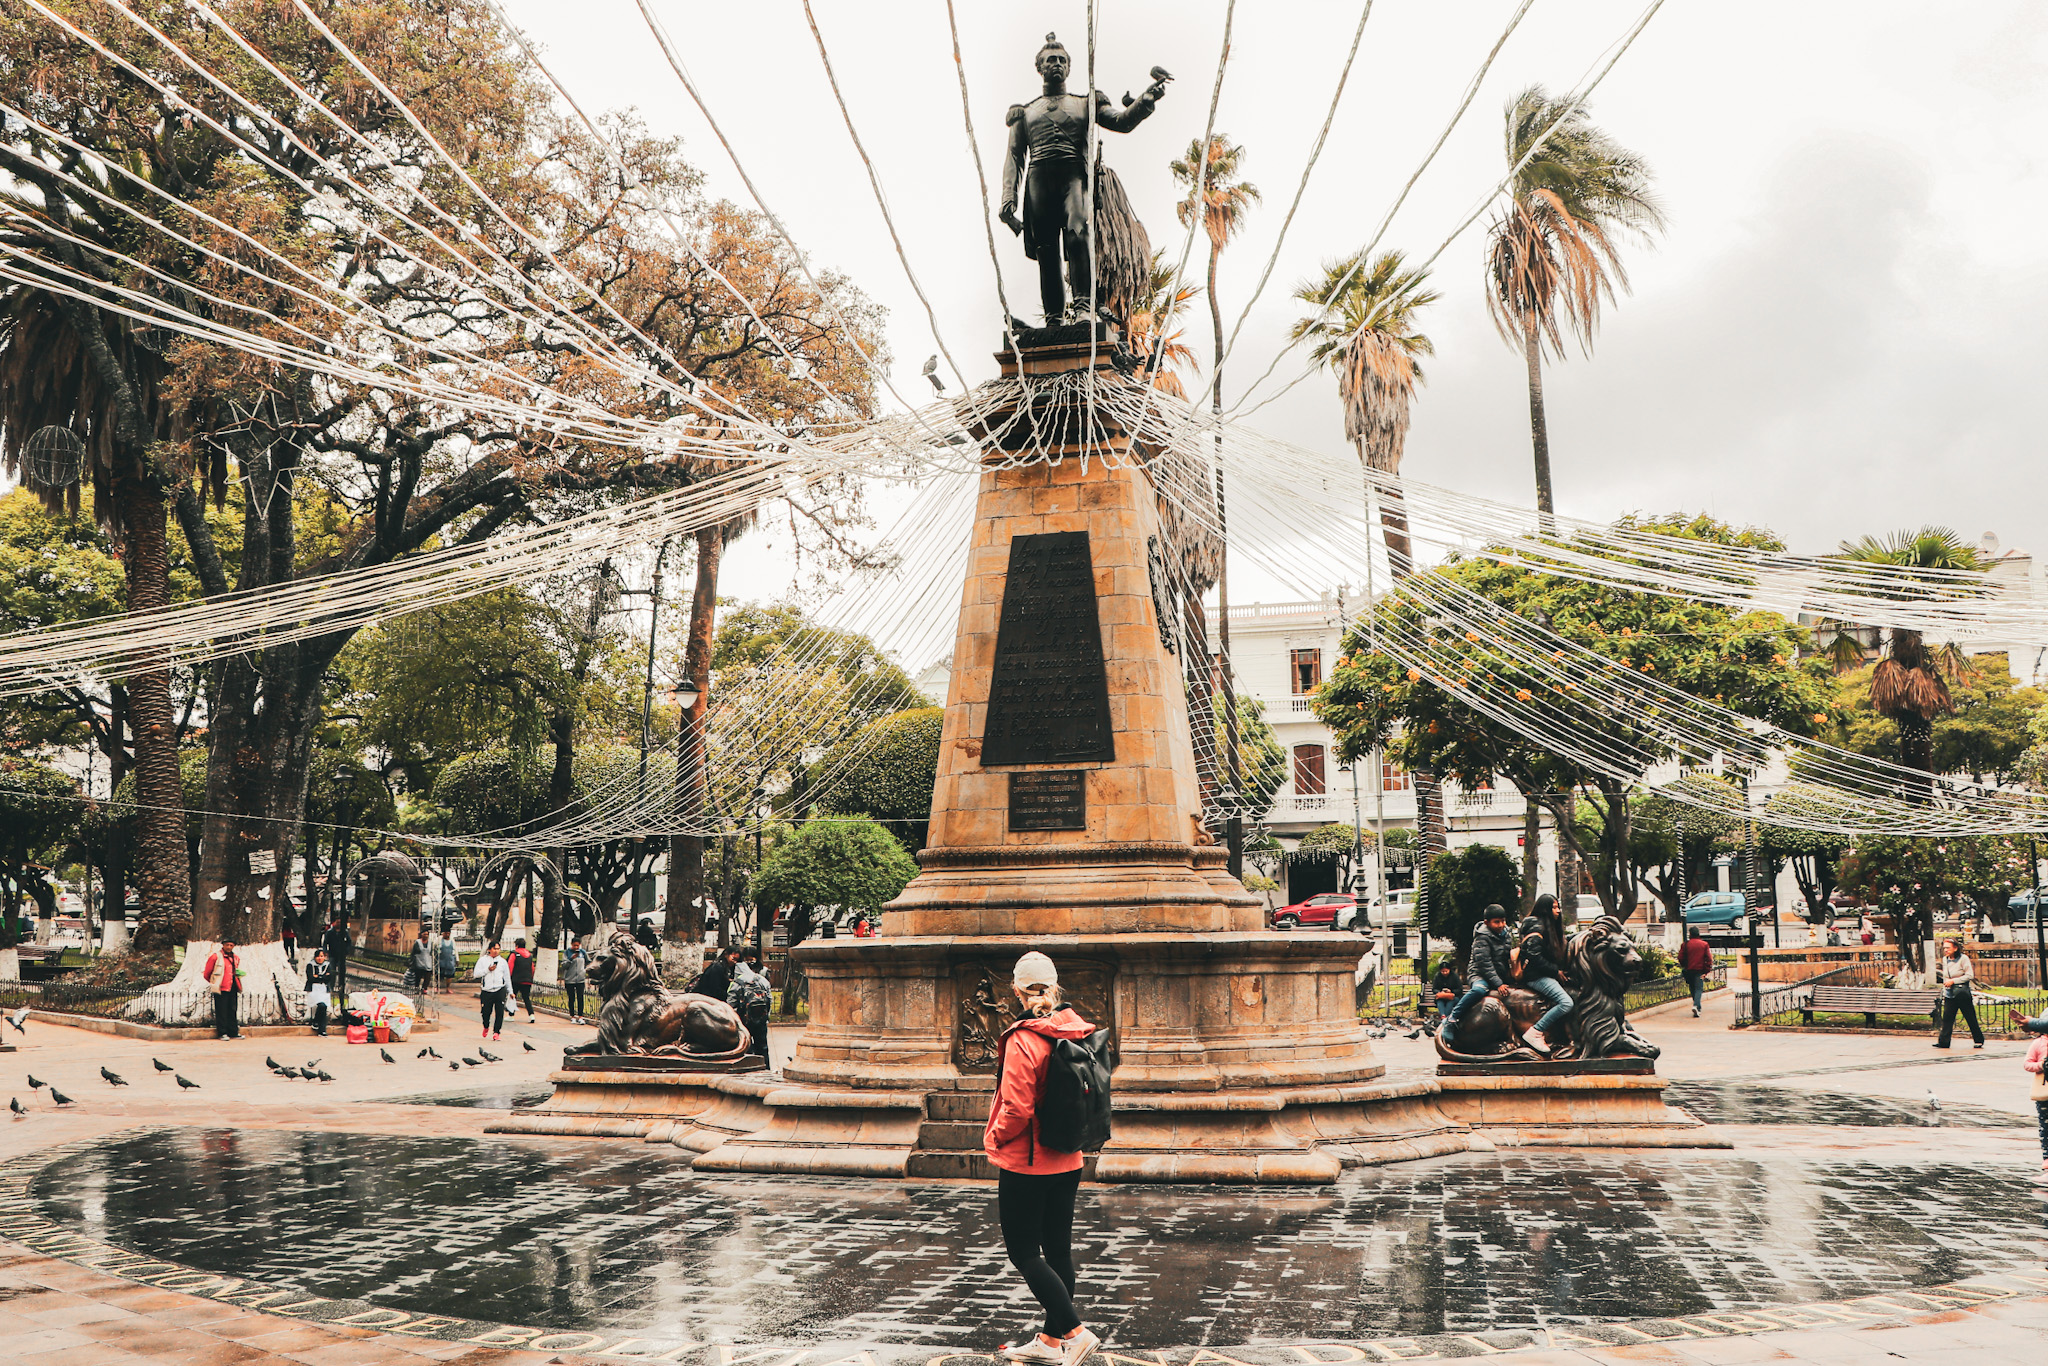 Best Things to Do in Sucre, Bolivia: Plaza de Armas 25 de Mayo